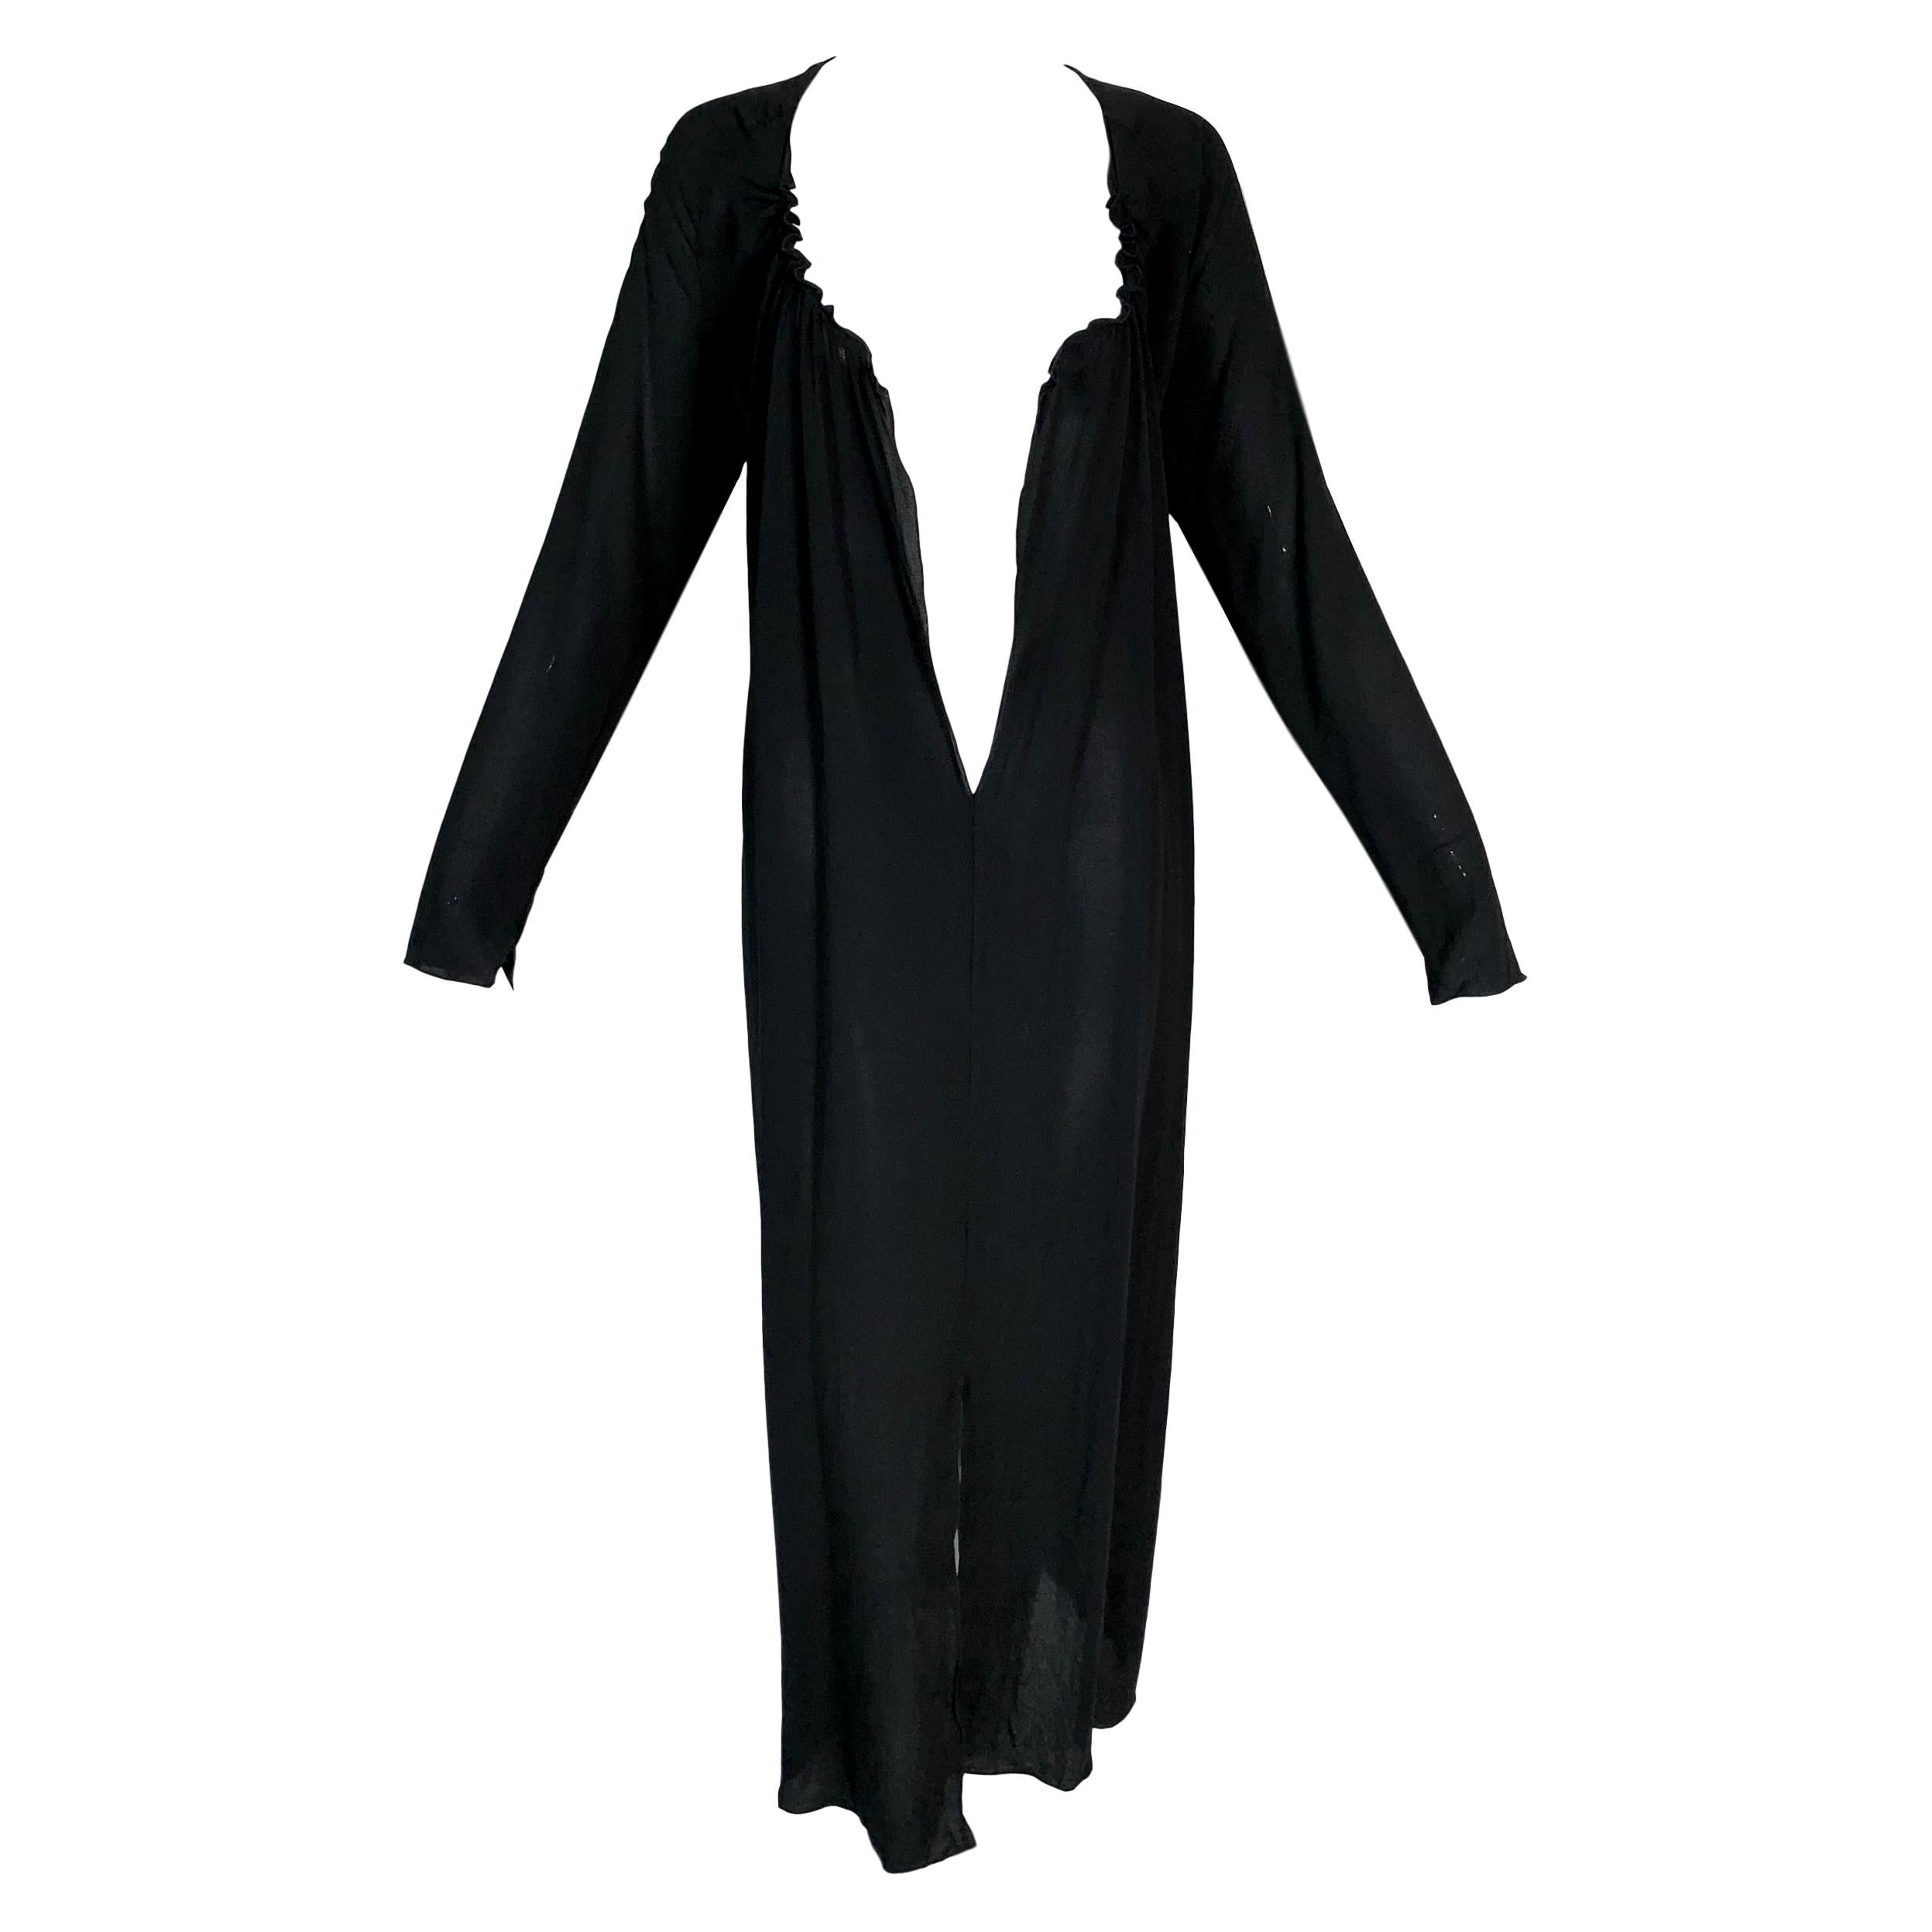 S/S 2002 Gucci by Tom Ford Runway Plunging Black Silk L/S Dress